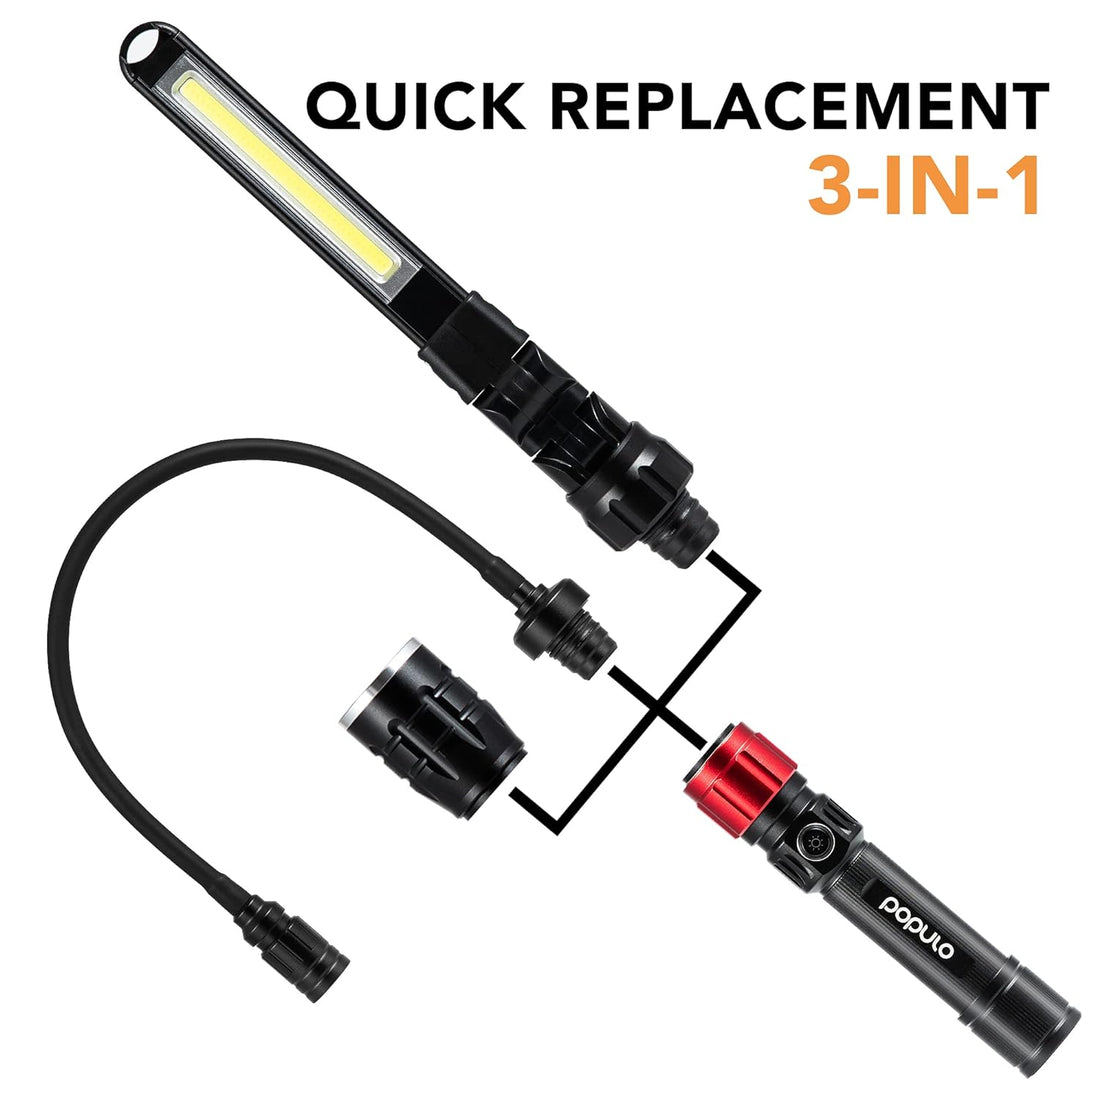 POPULO 3 In 1 Led Work Lights, Maglite Flashlight For Household, Camping And Car Repair, Emergency Lights For Home Power Failure, High Lumens 18650 Rechargeable Flashlights, Outdoor Handheld Spotlight